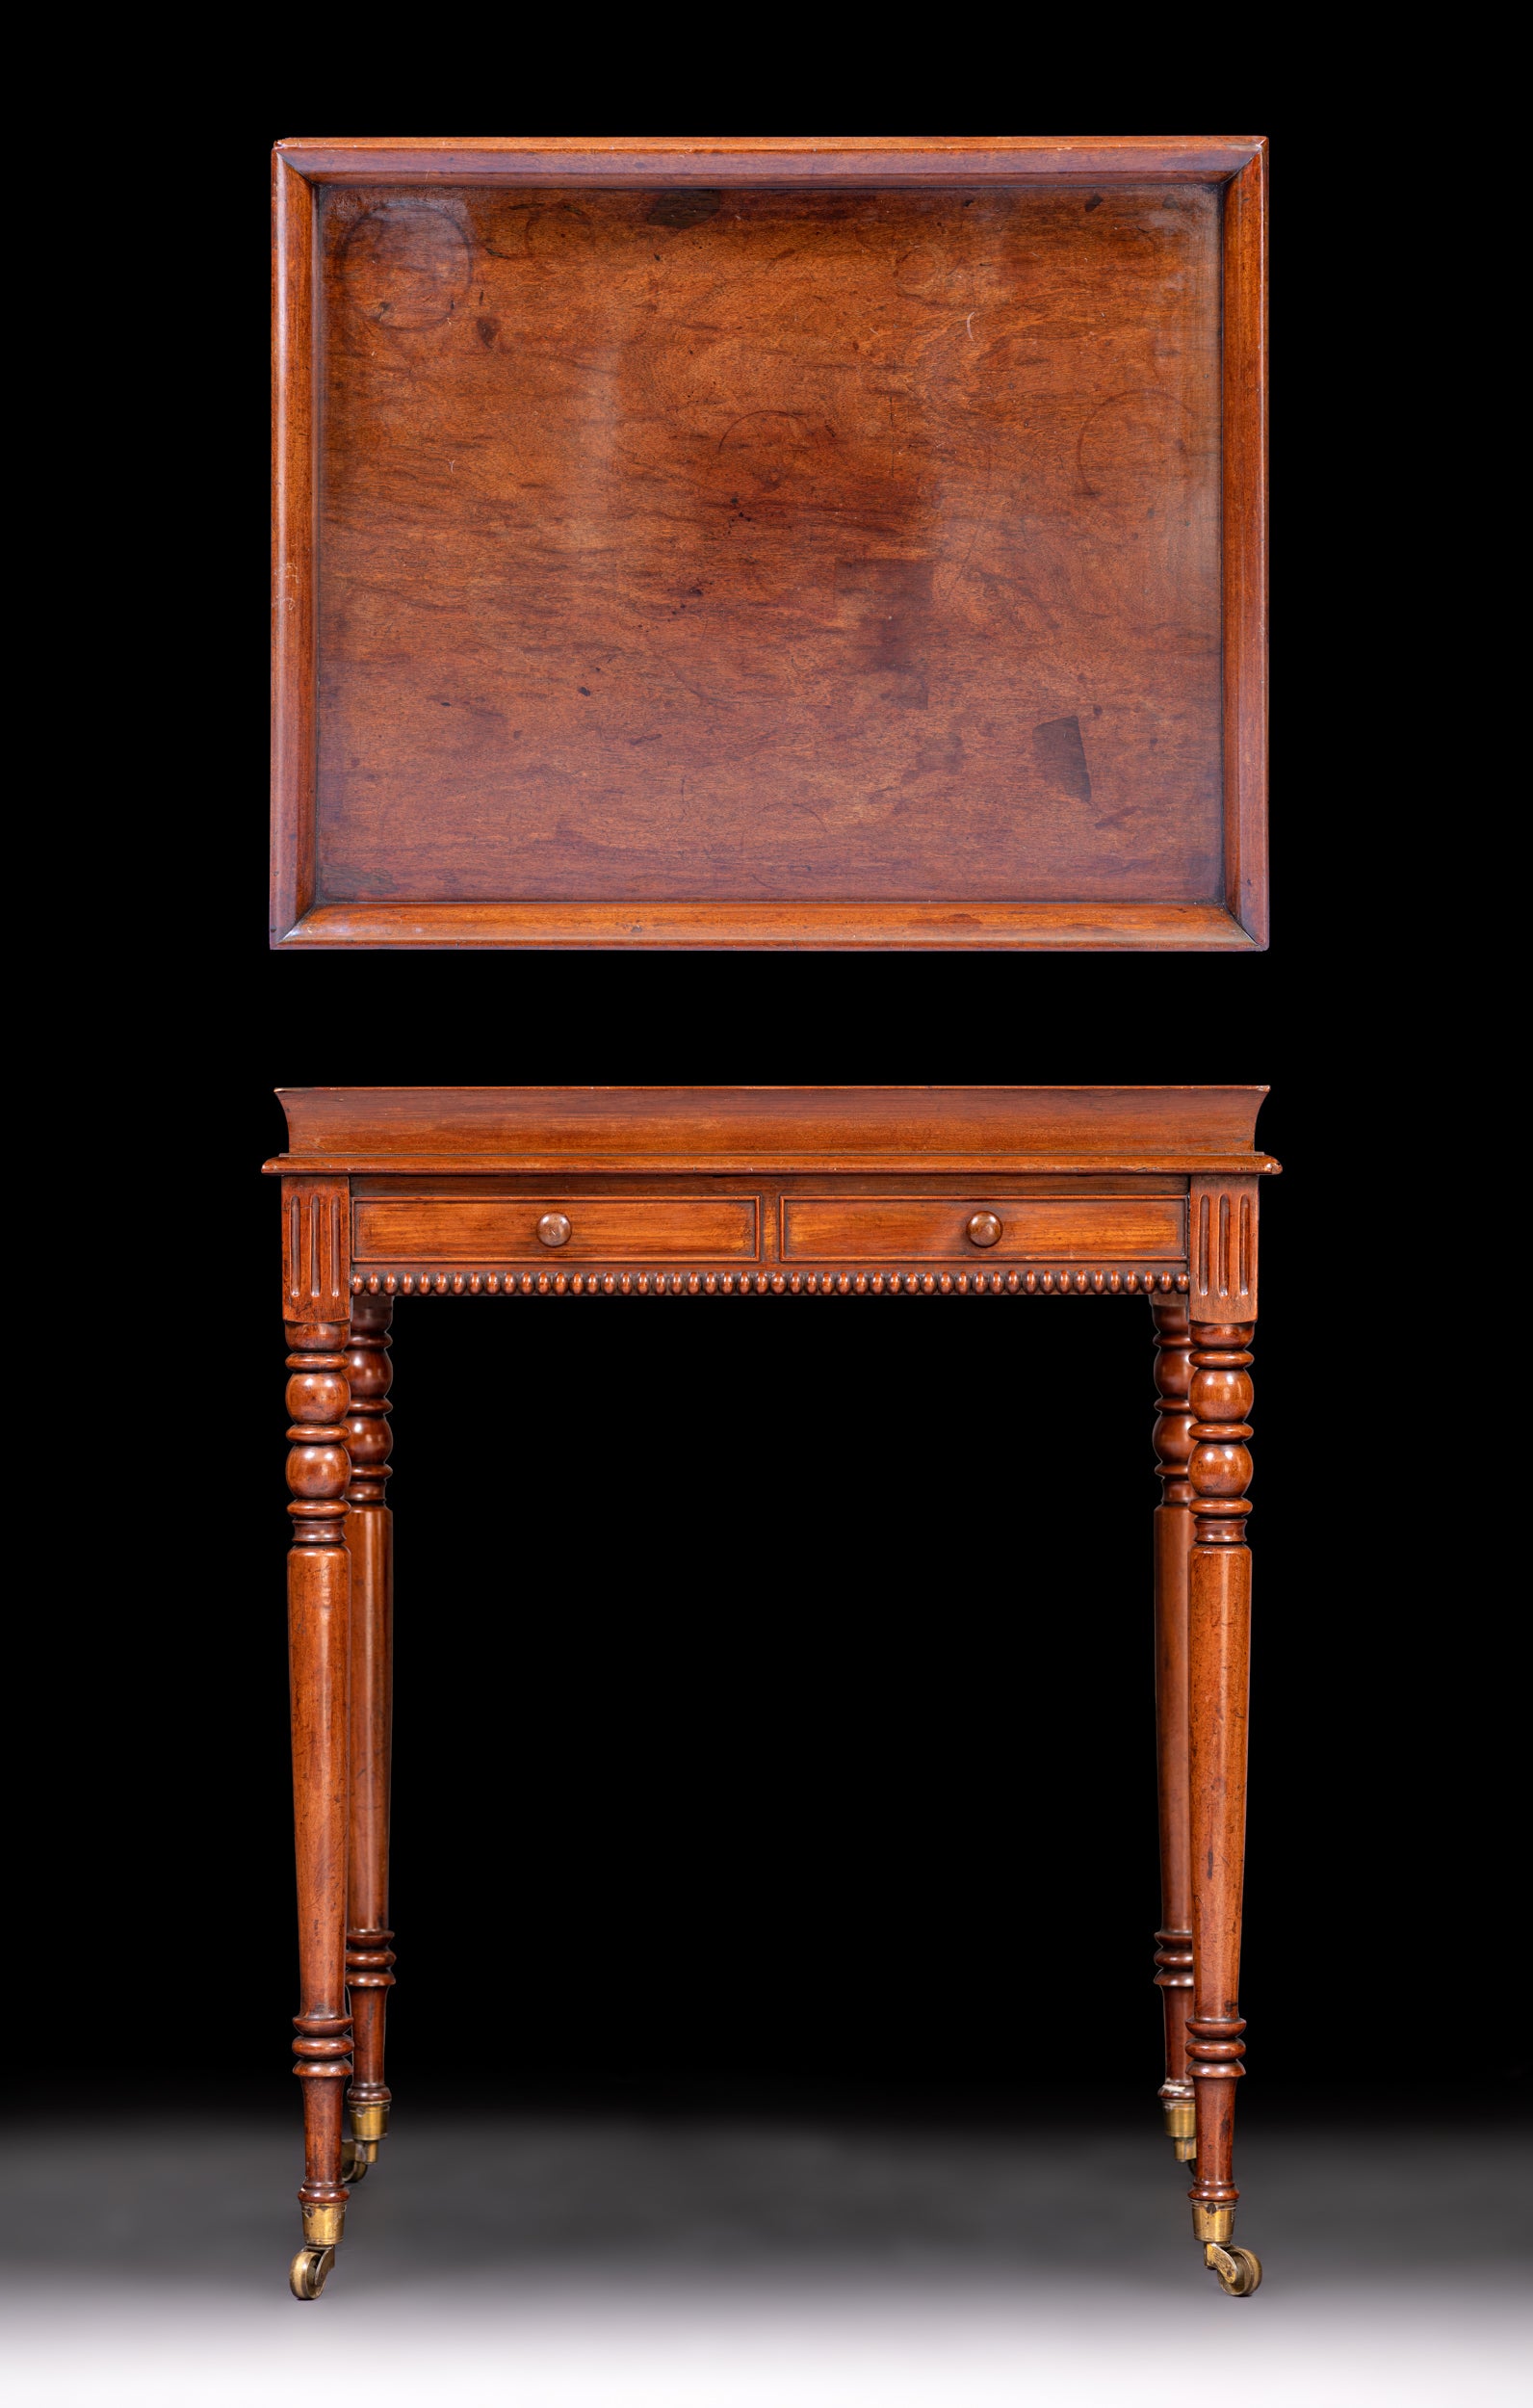 Early 19th Century English Regency Side Table Attributed to Gillows of Lancaster In Good Condition For Sale In Dublin, IE